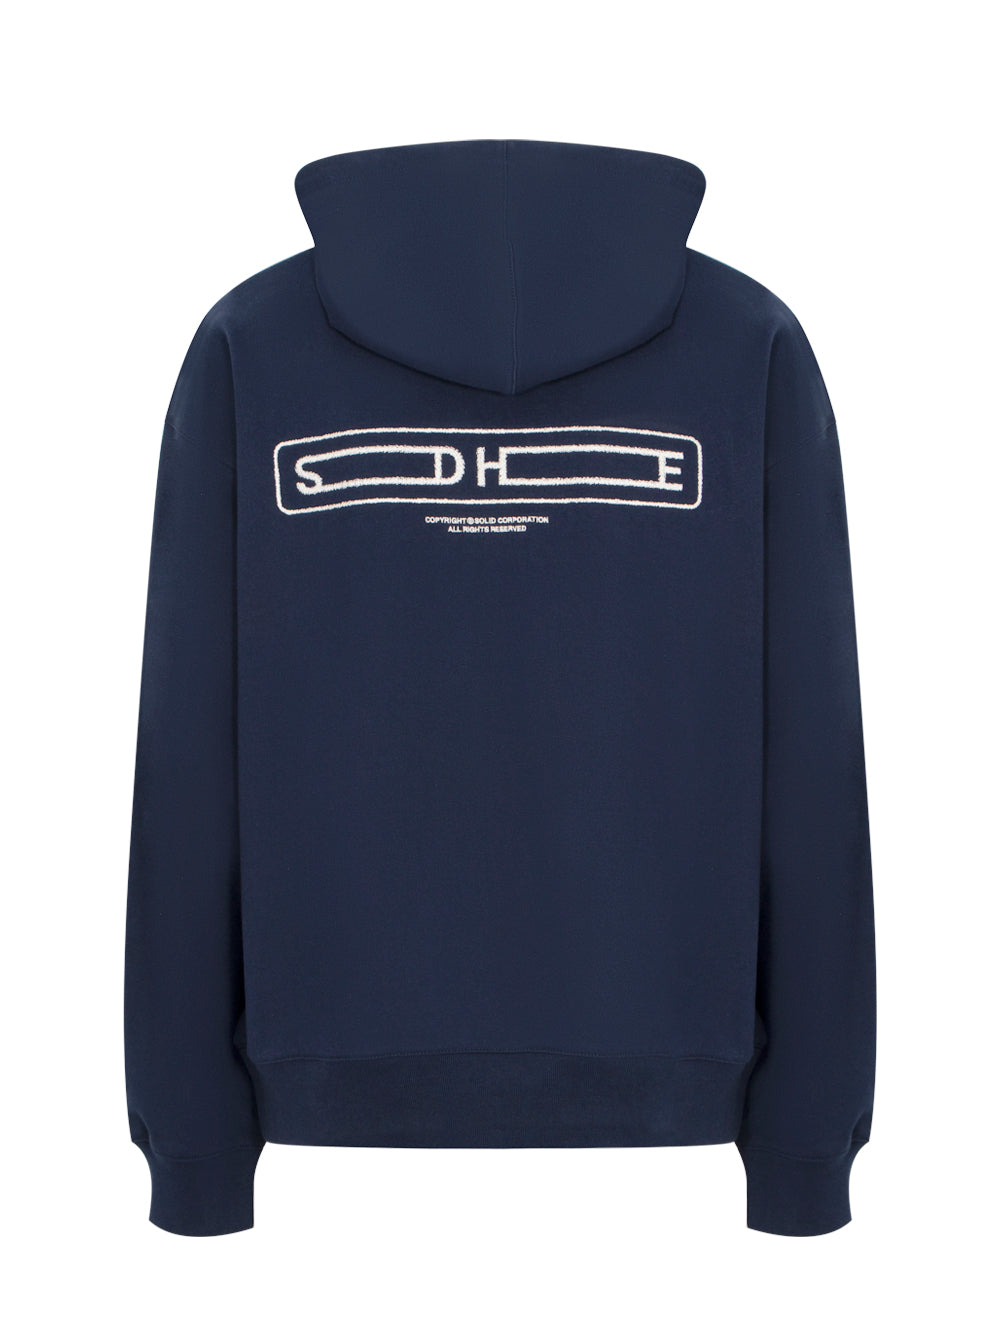 Embroidered Hoodie (Navy)